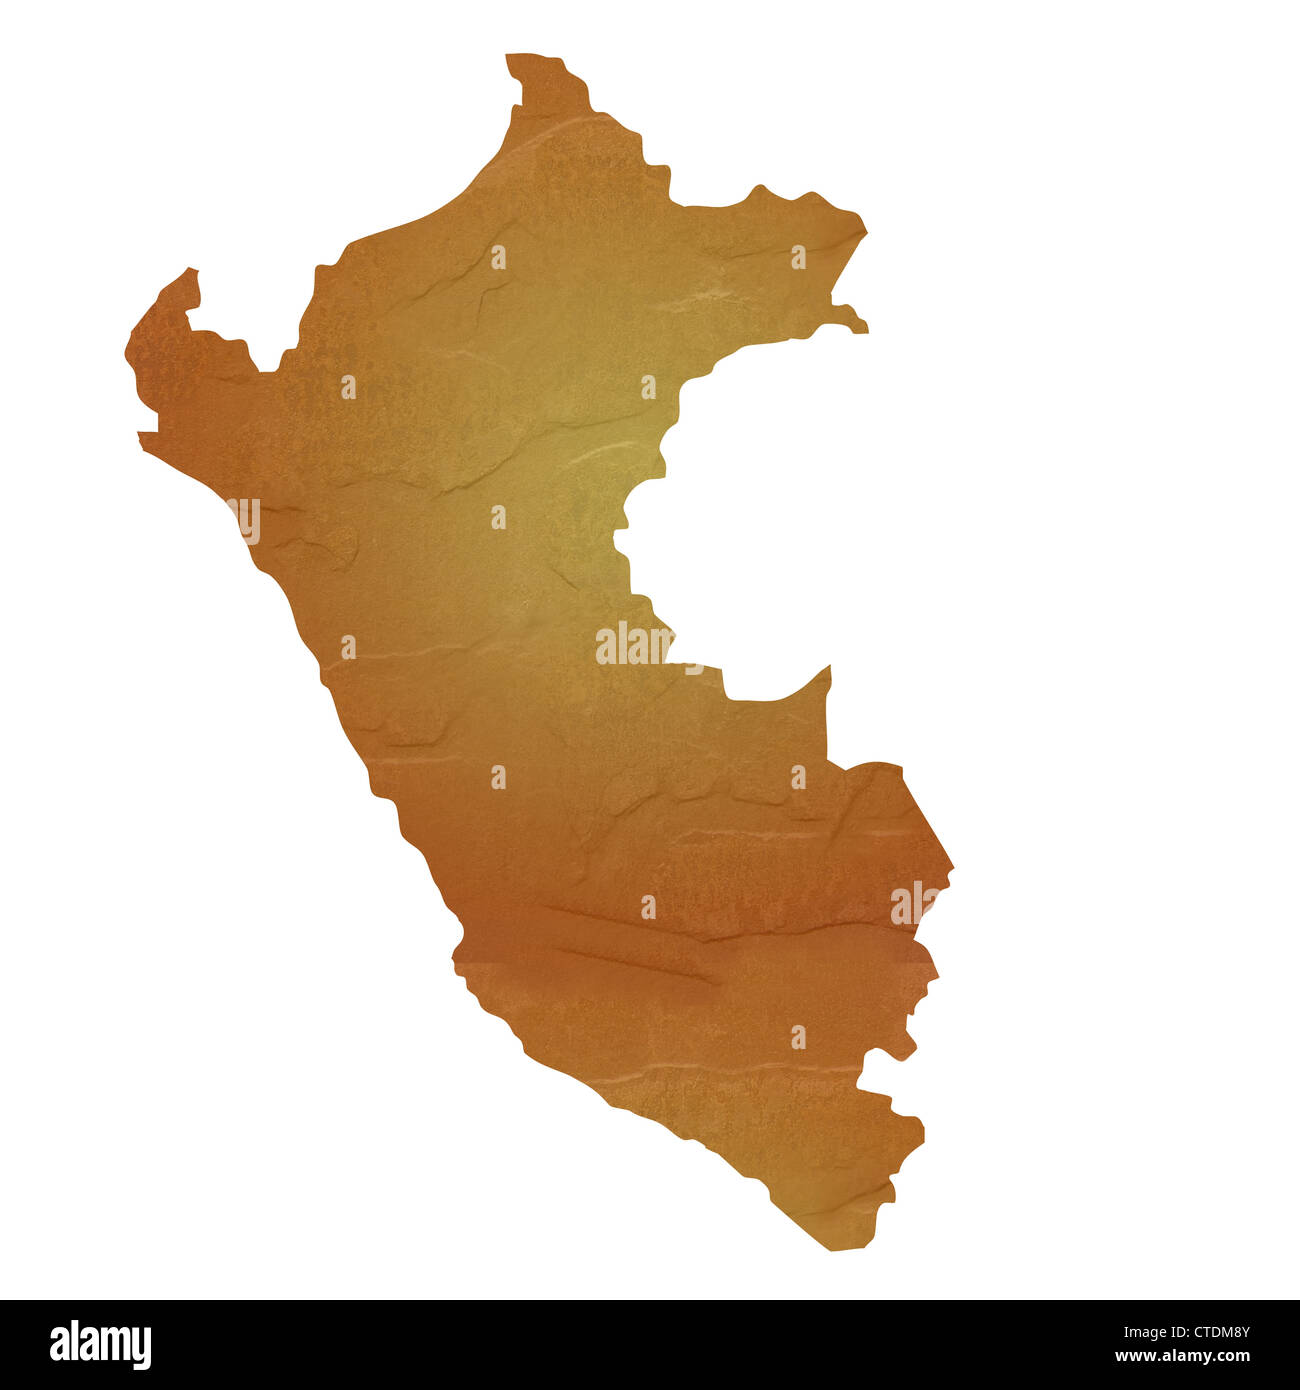 Textured map of Peru map with brown rock or stone texture, isolated on white background with clipping path. Stock Photo